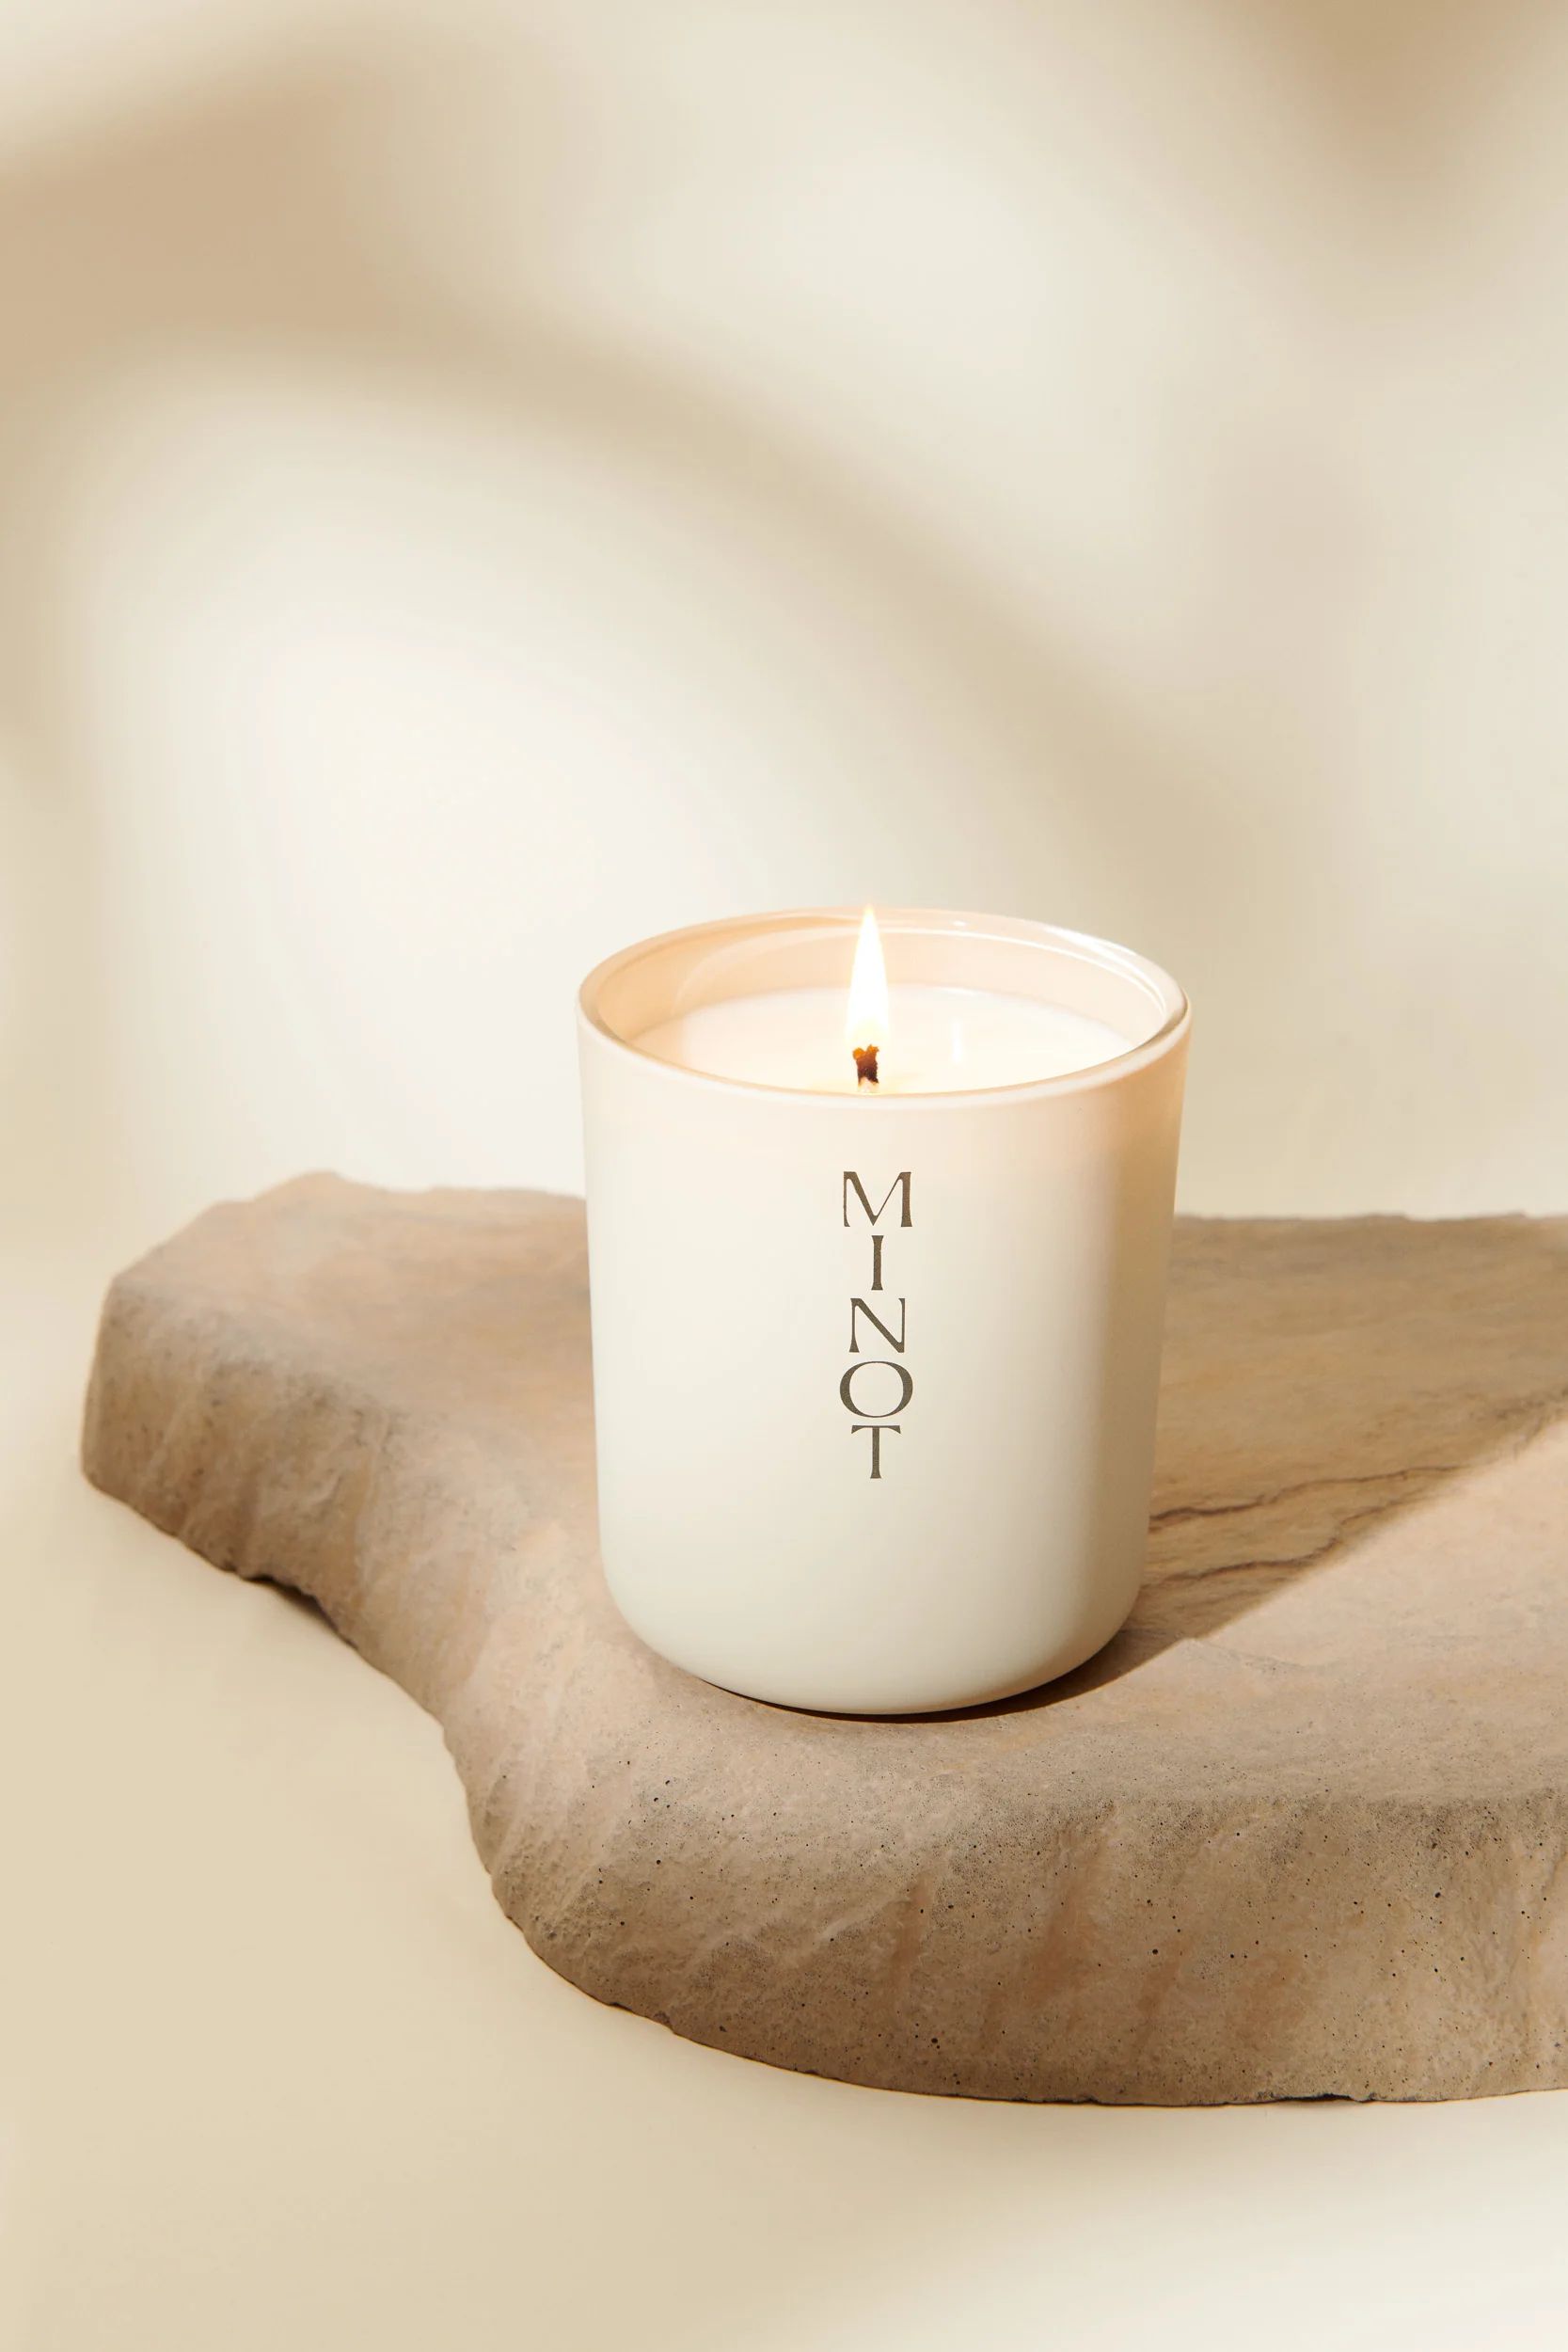 Atmosphere Candle | MINOT